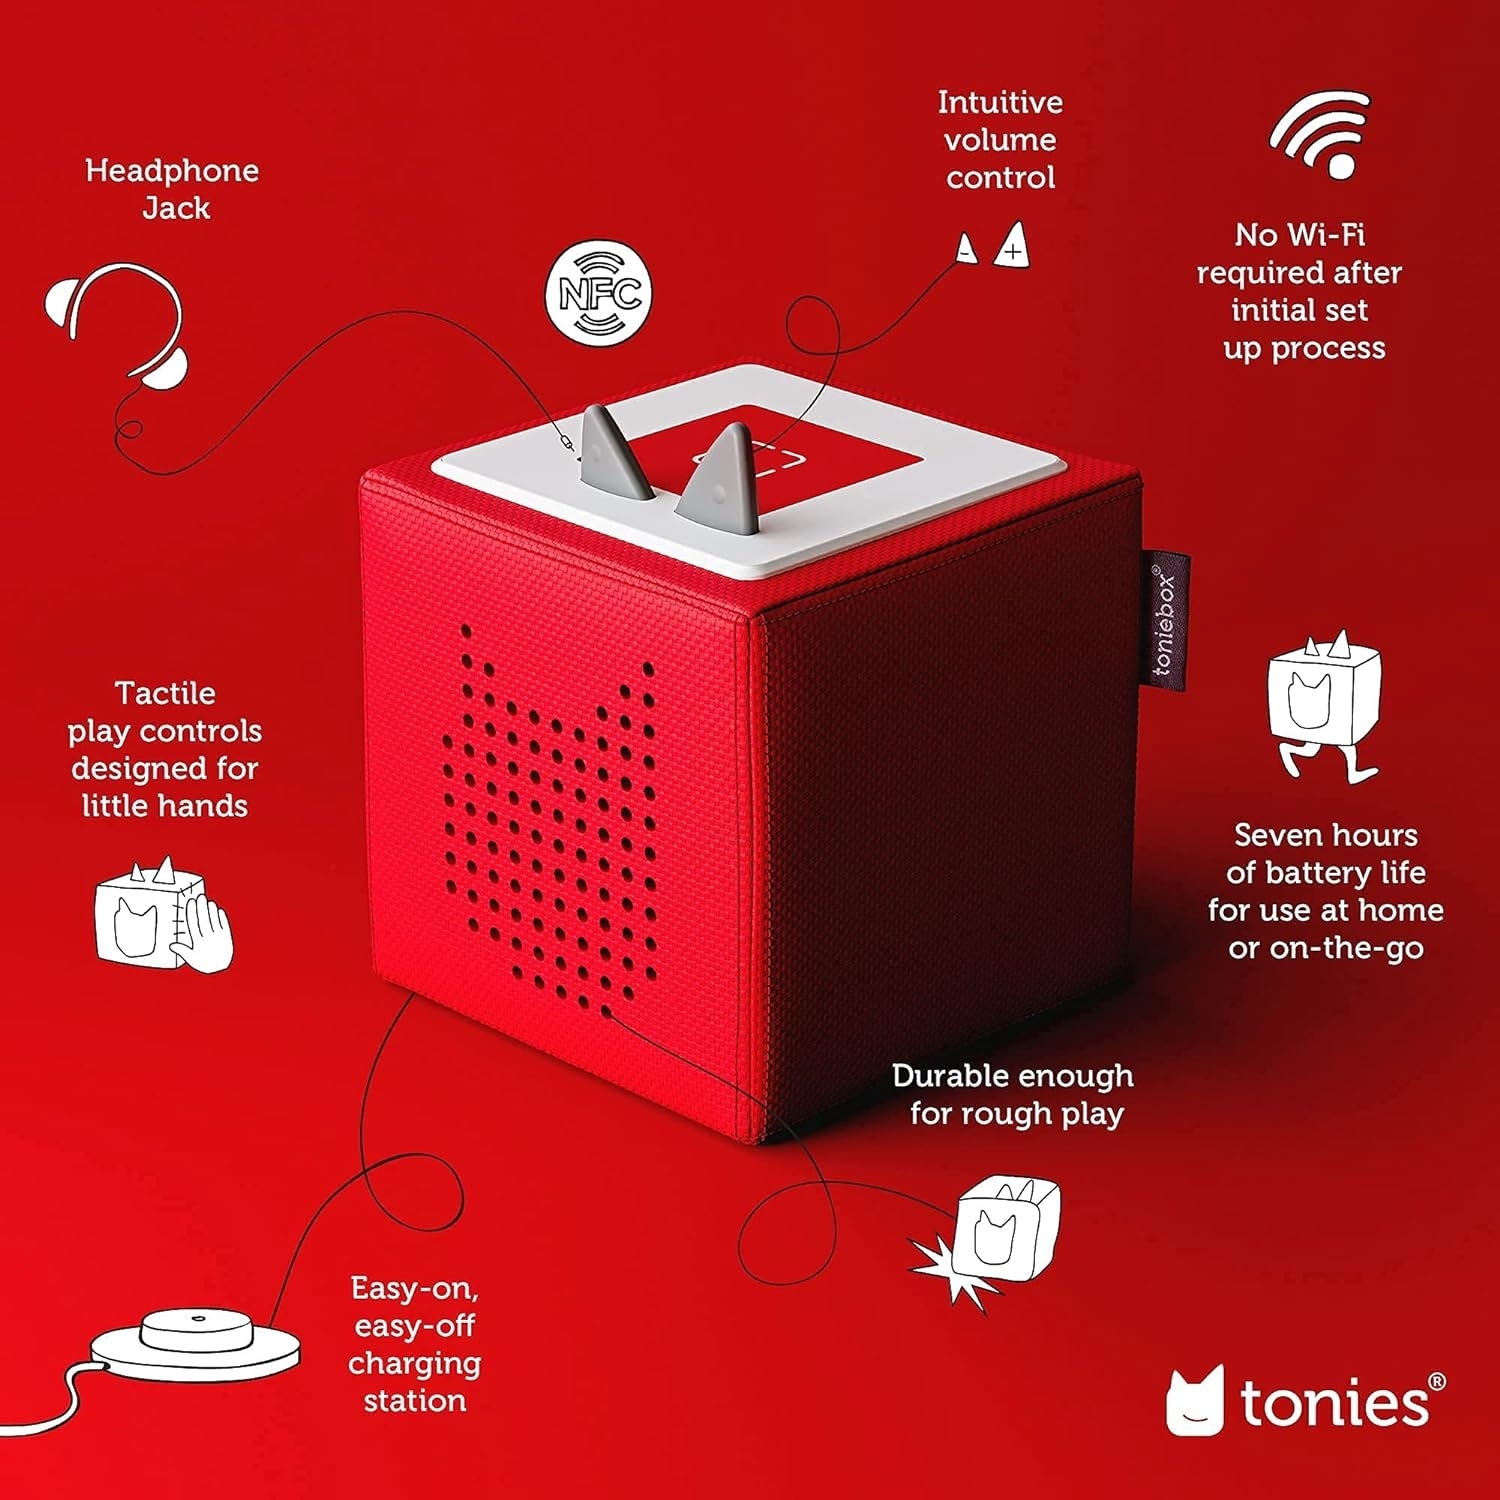 Graphic of a red portable speaker-looking device, various features highlighted, like headphone jack and durable design, for home or on-the-go use